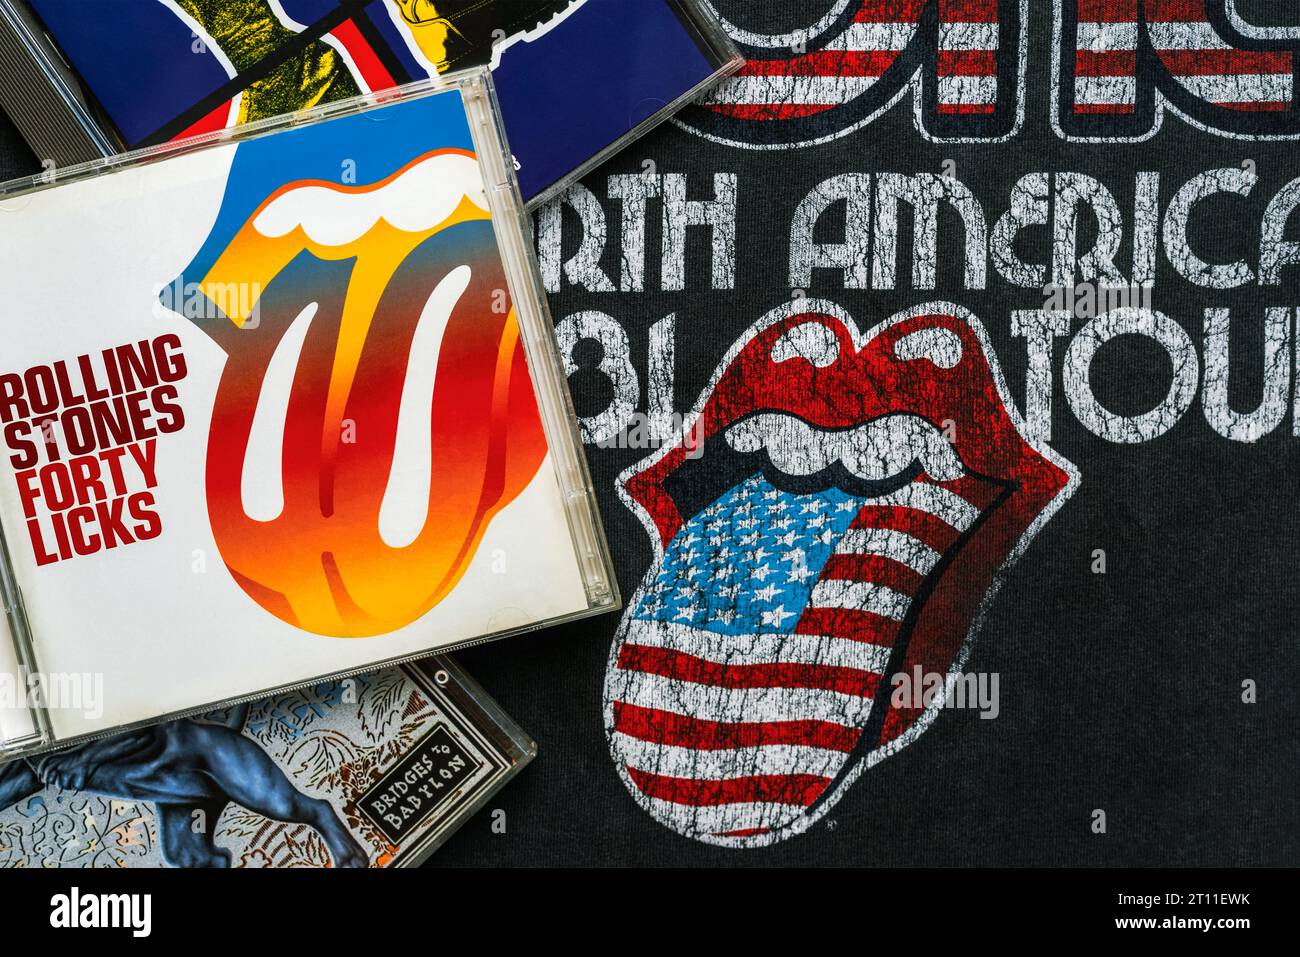 CDs of the British rock band The Rolling Stones over on a T-shirt with the The Rolling Stones logo. Illustrative editorial Stock Photo